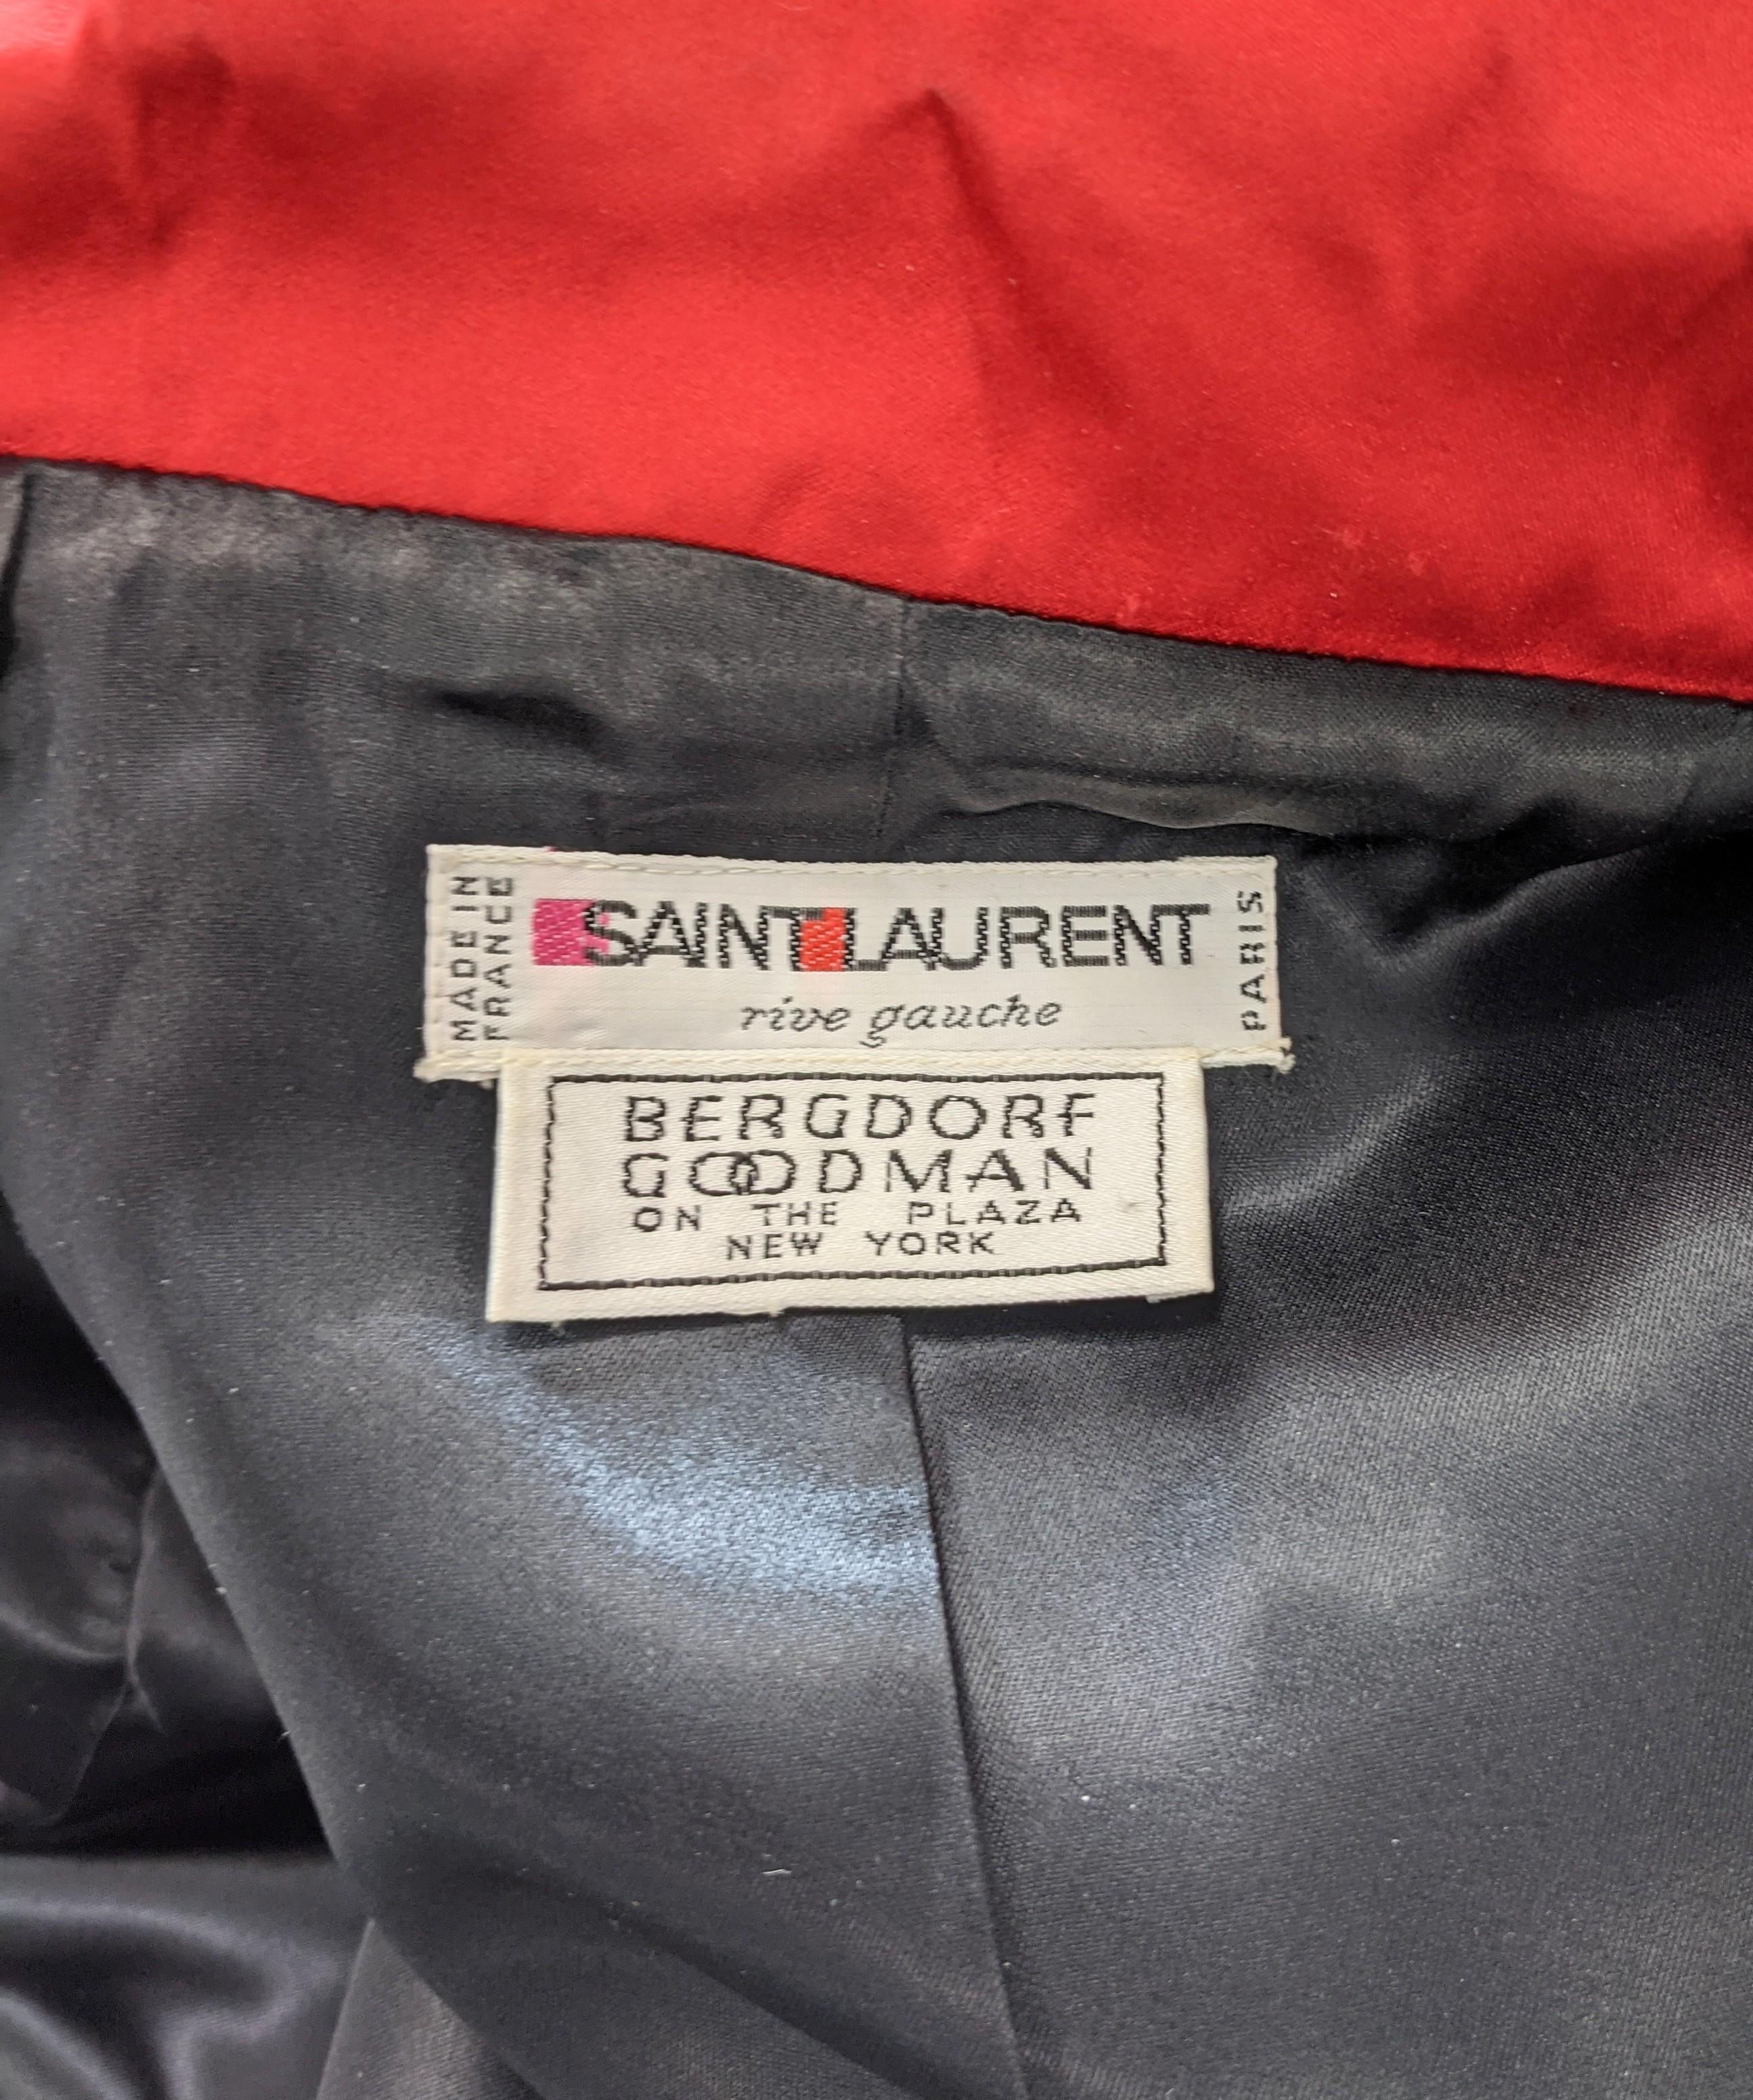 Yves Saint Laurent Rive Gauche Tuxedo Jacket, 1989 In Excellent Condition For Sale In New York, NY